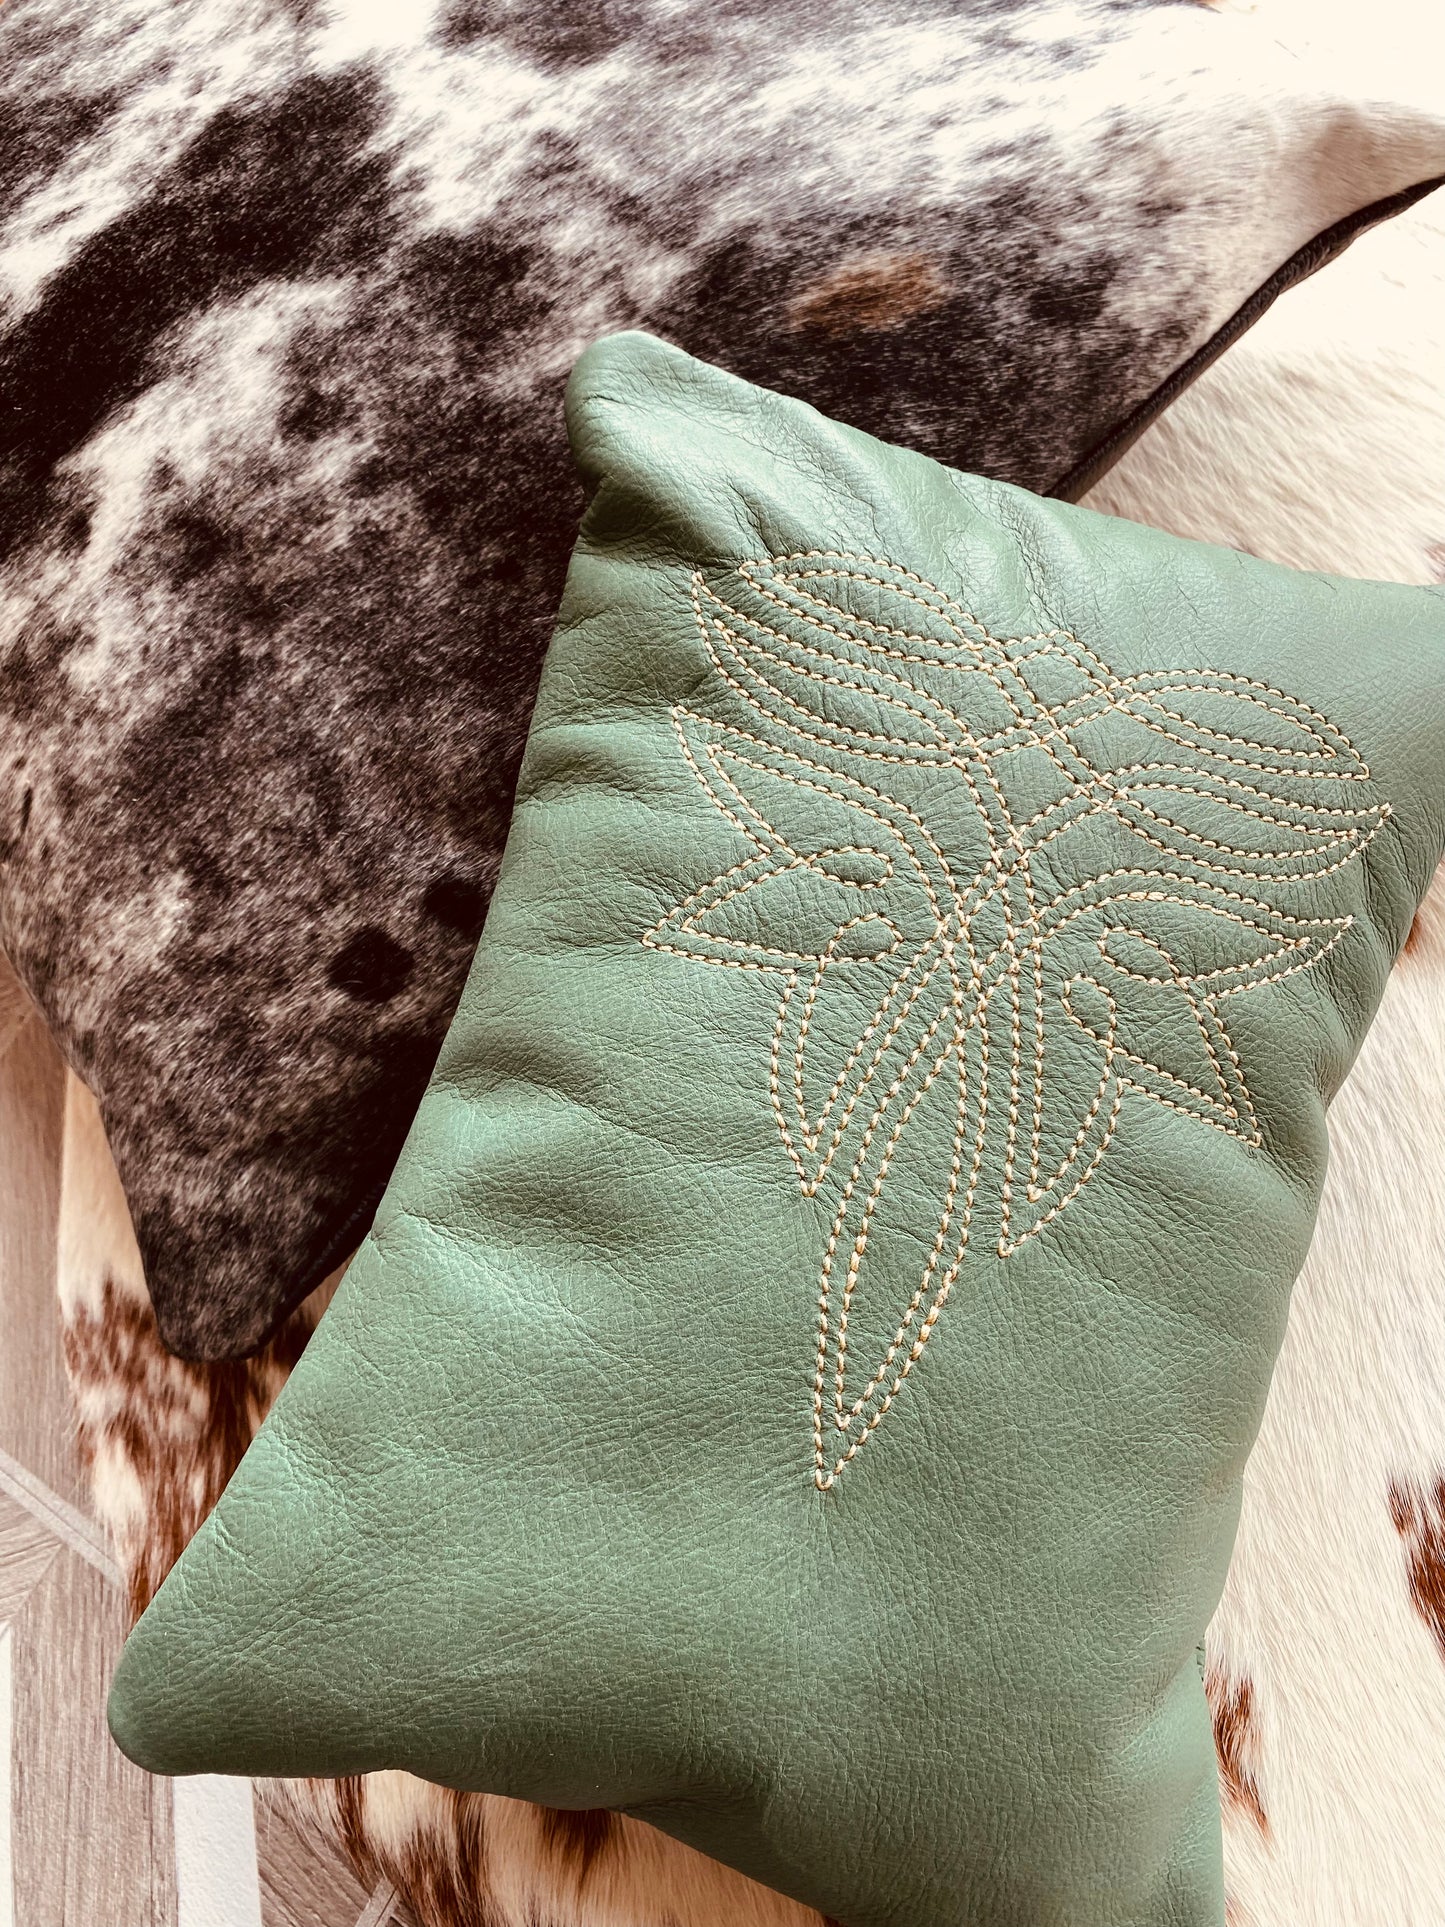 Boot stitched pillows